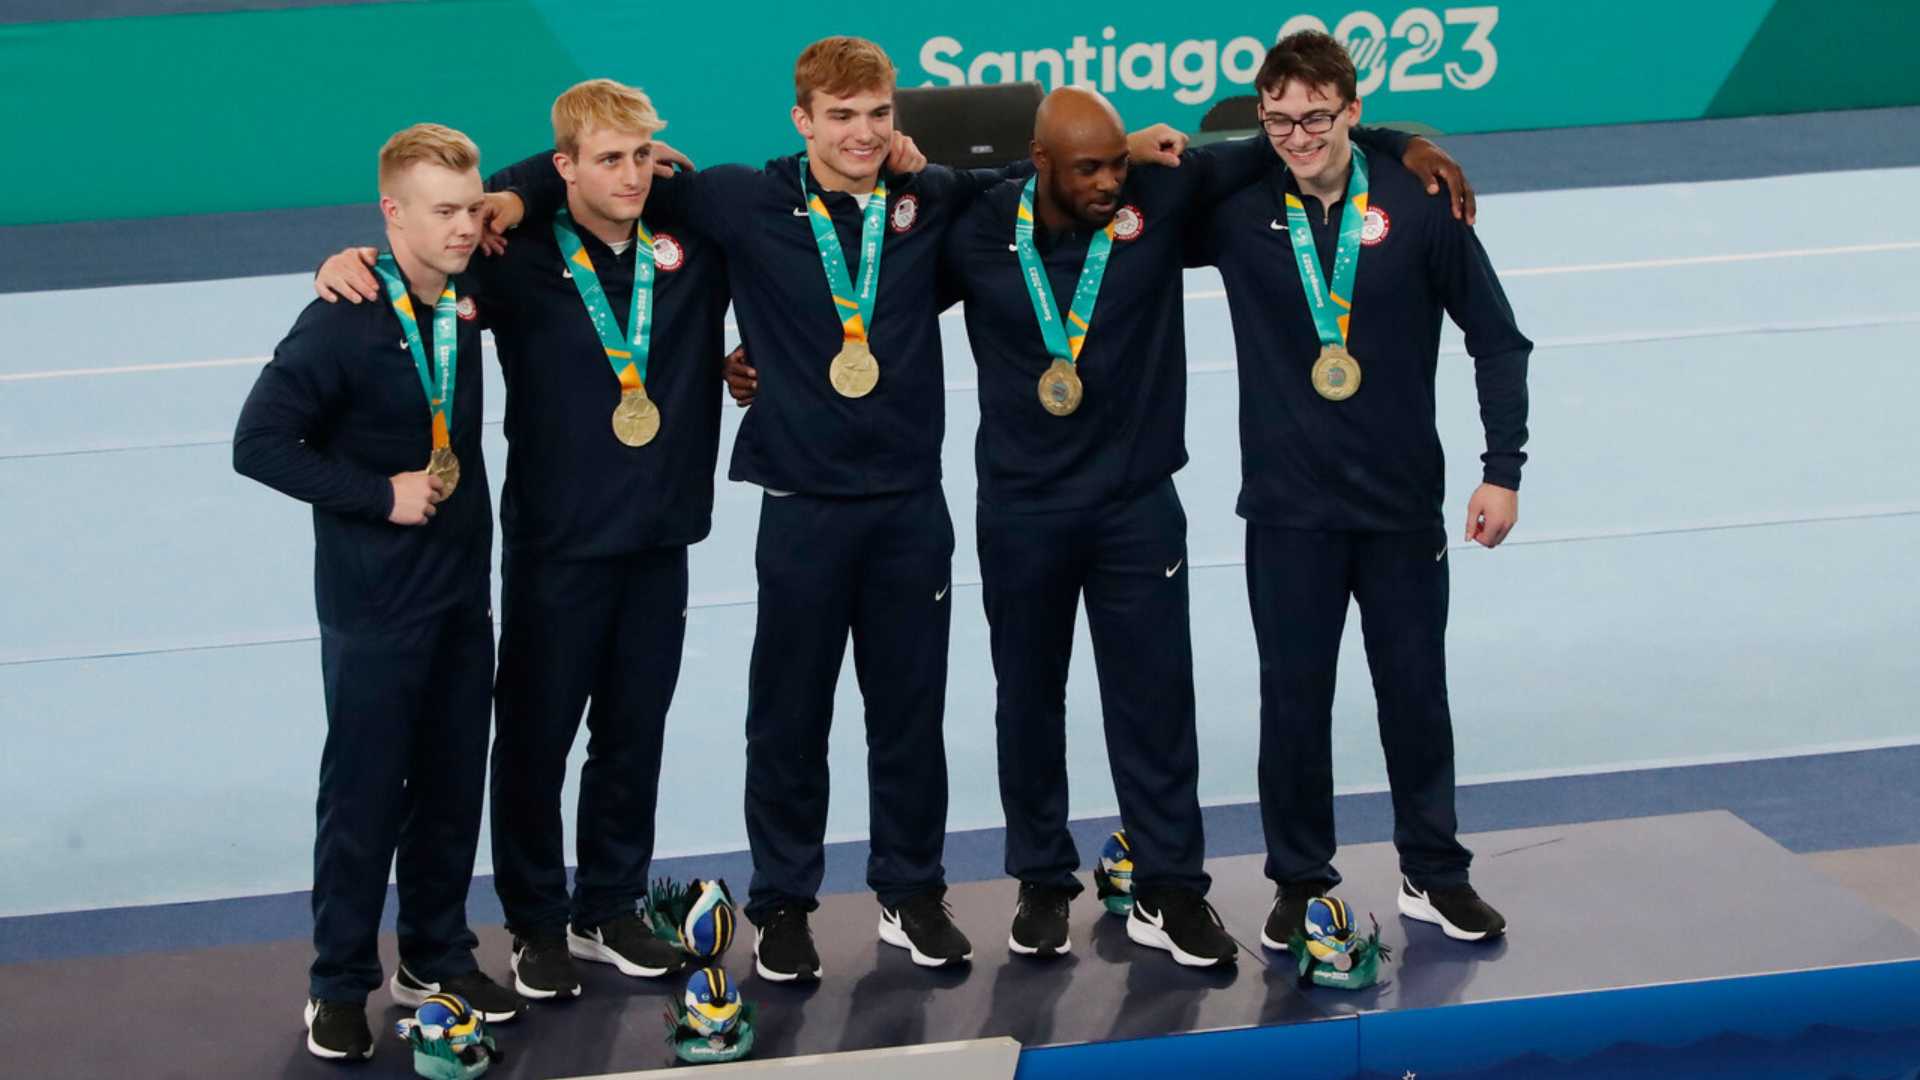 United States leads the medal table at Santiago 2023